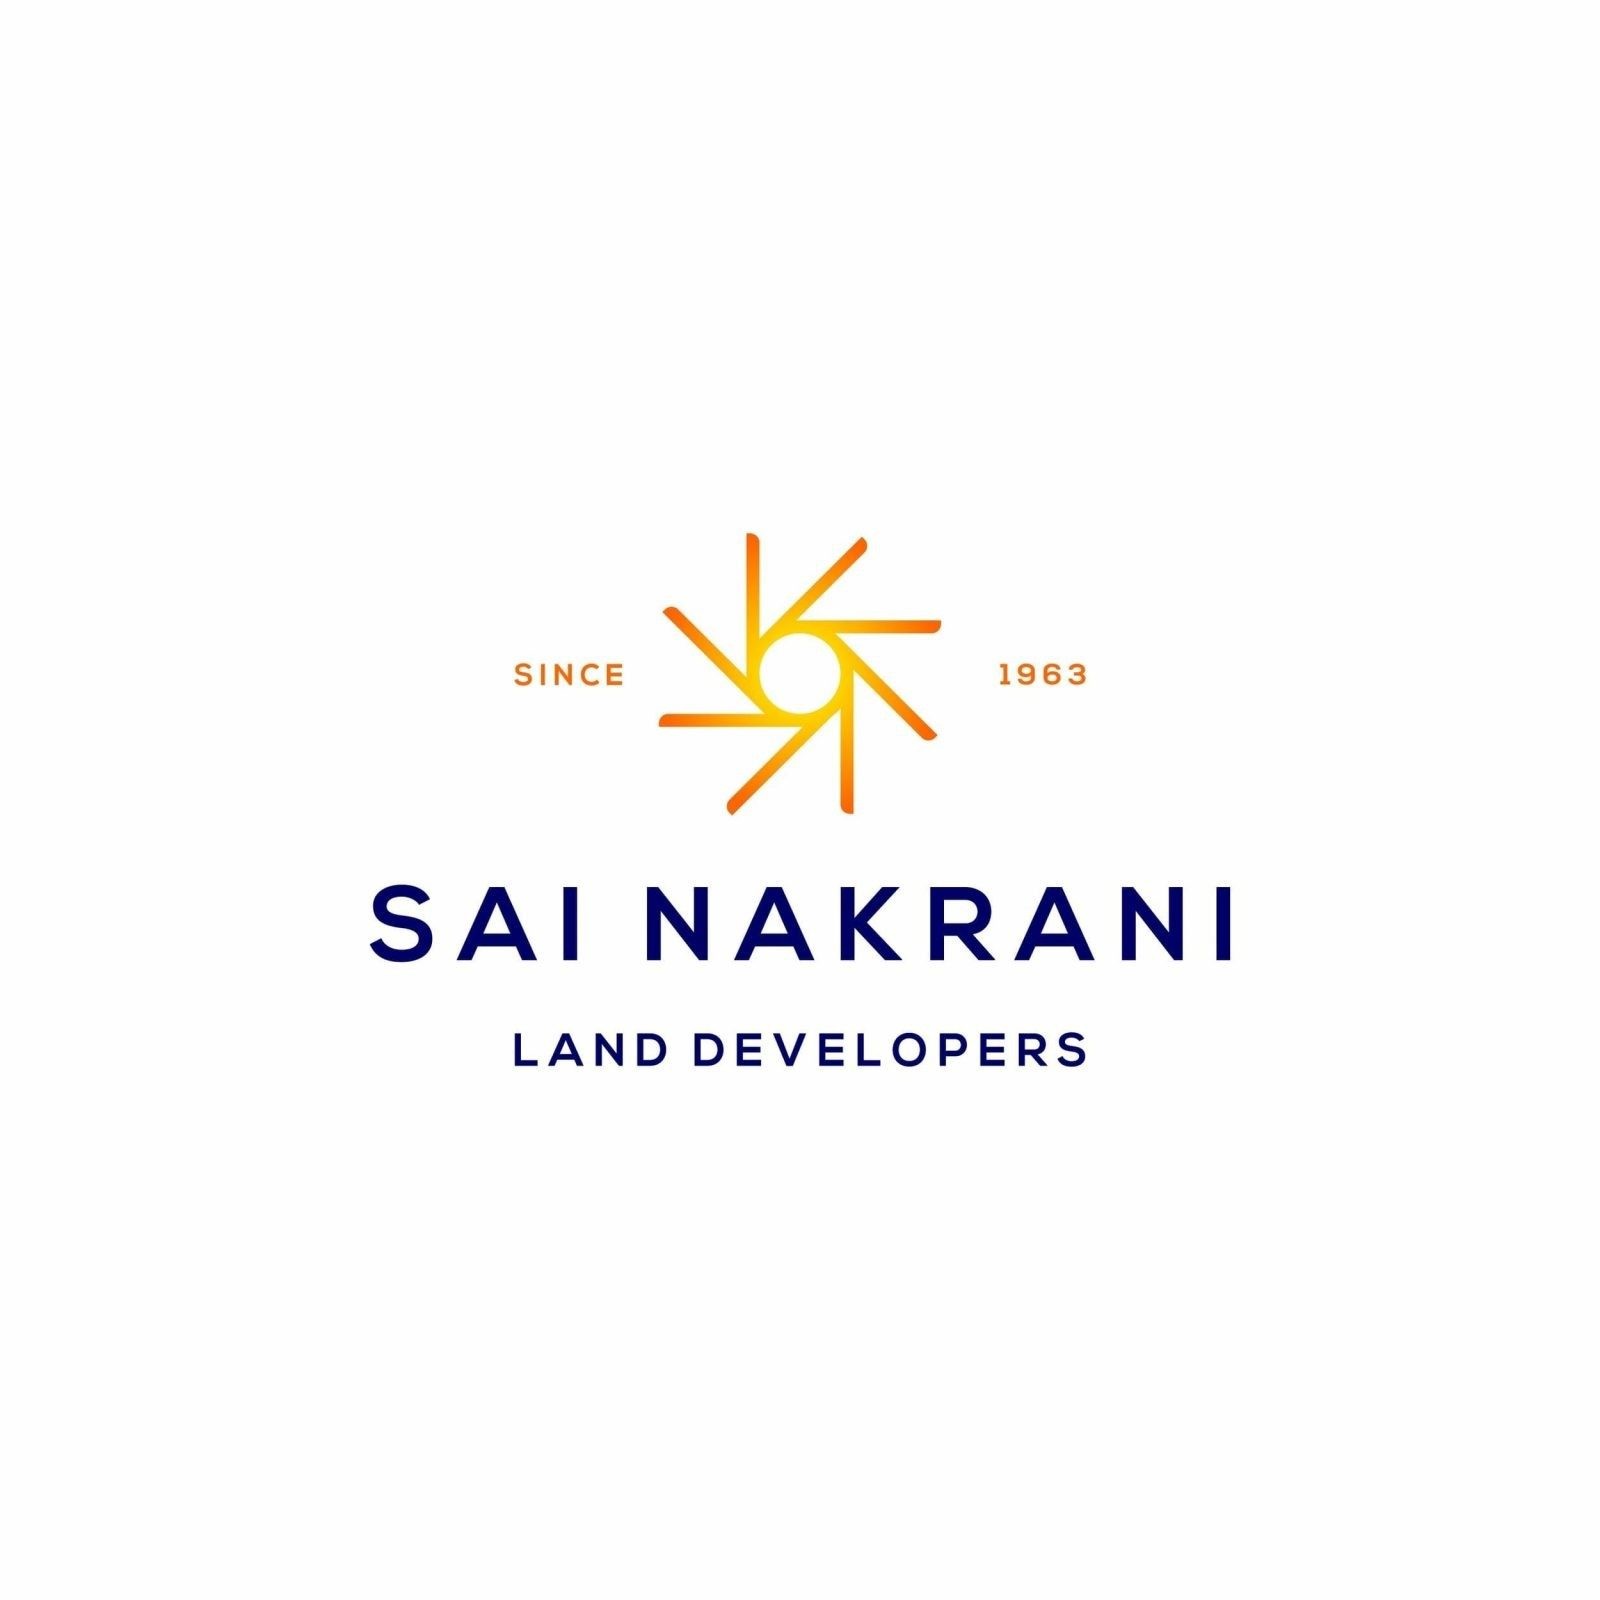 Identity Refreshed for a Real Estate Developer Based in Mumbai